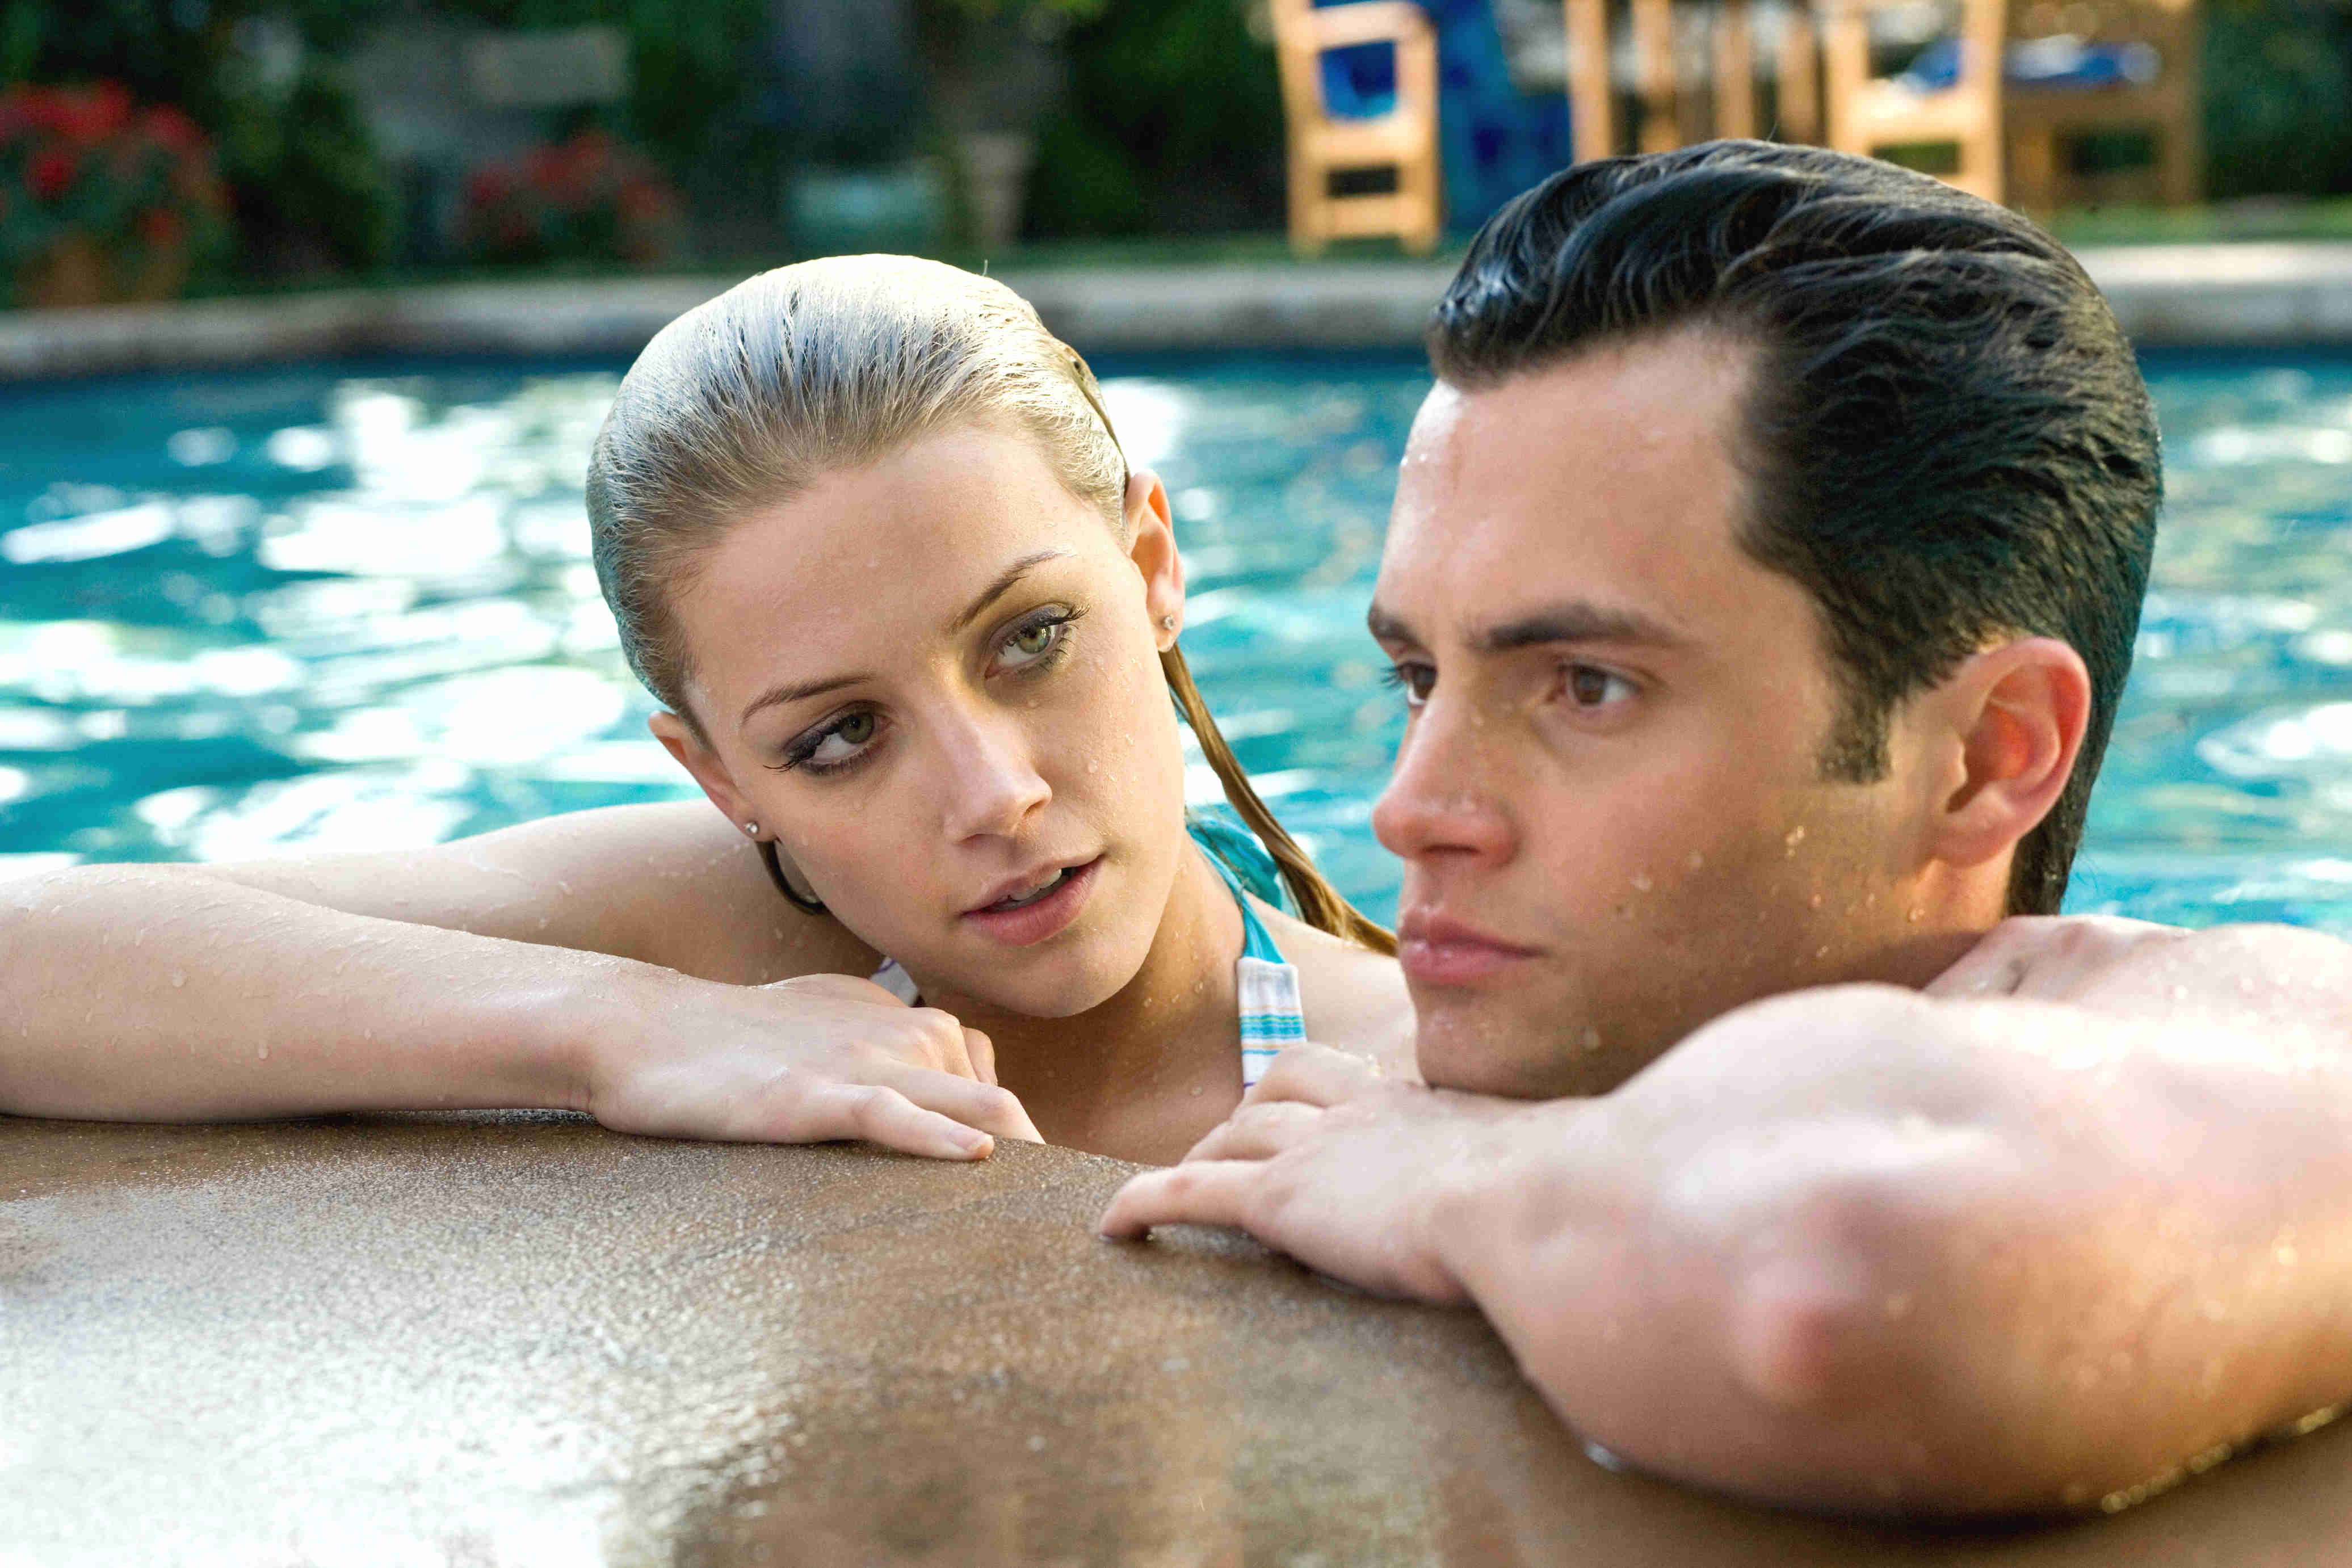 Penn Badgley as the stepson along with girlfriend Amber Heard in The Stepfather (2009)